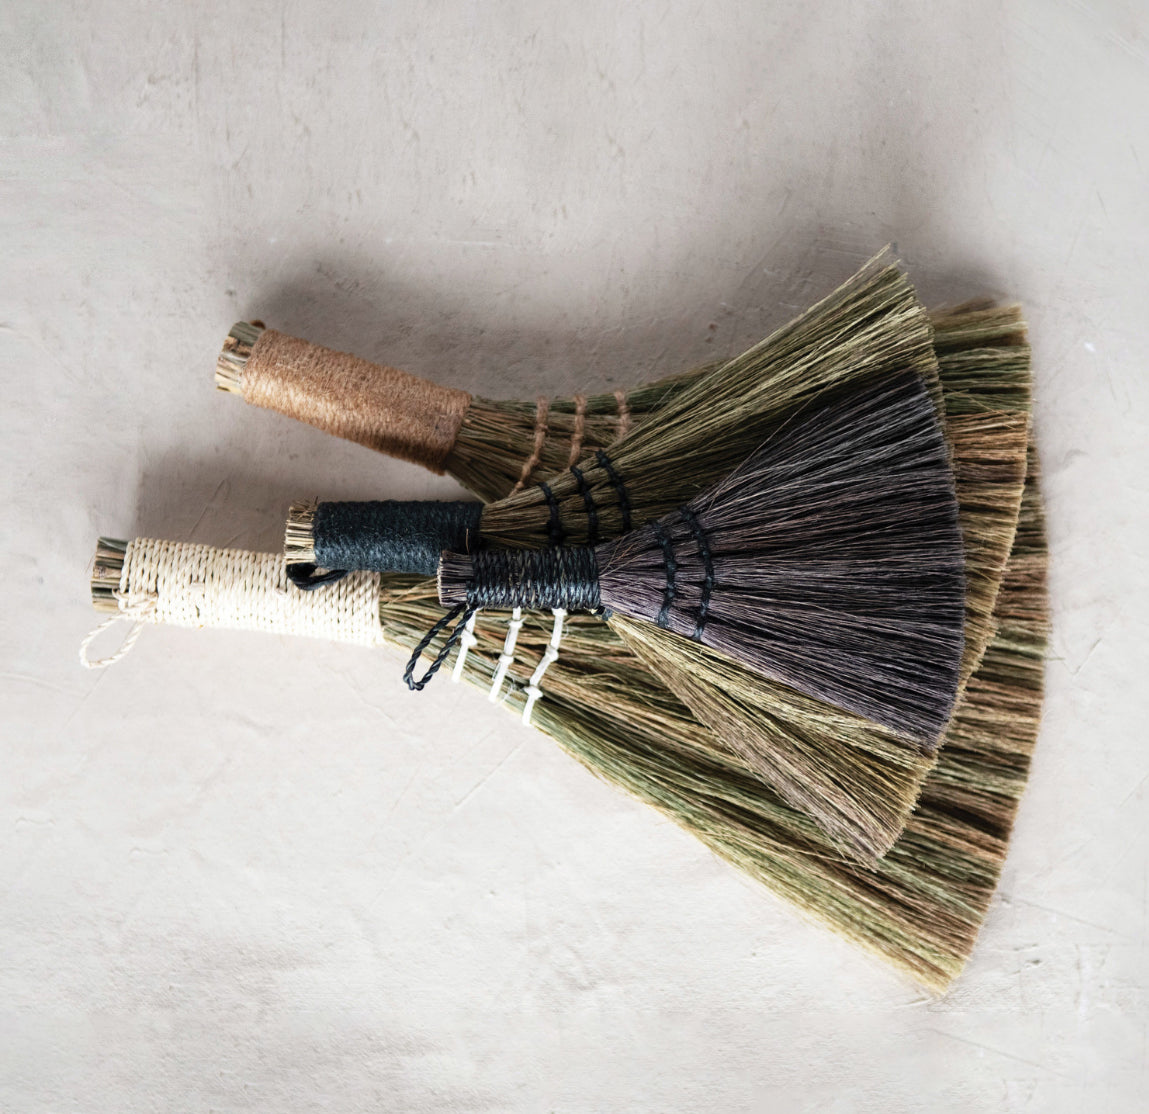 Whisk Broom with Yarn Wrapped Handle - Natural with White Handle